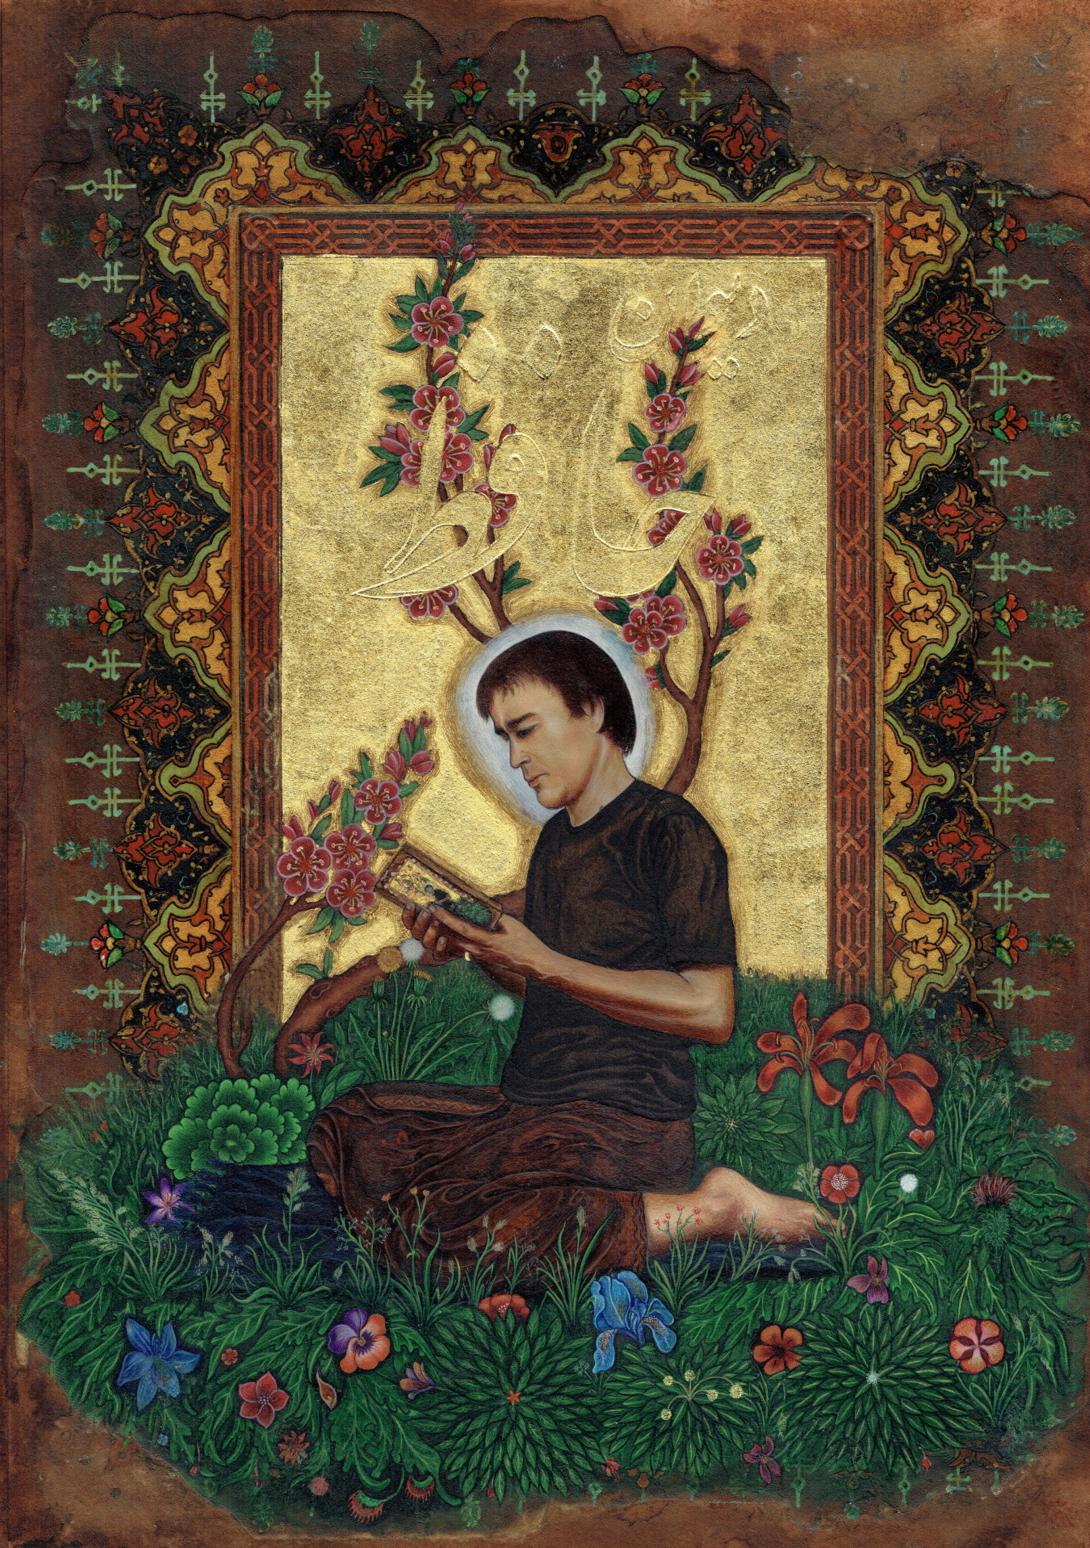 A gilded painting of a man kneeling in a garden reading.